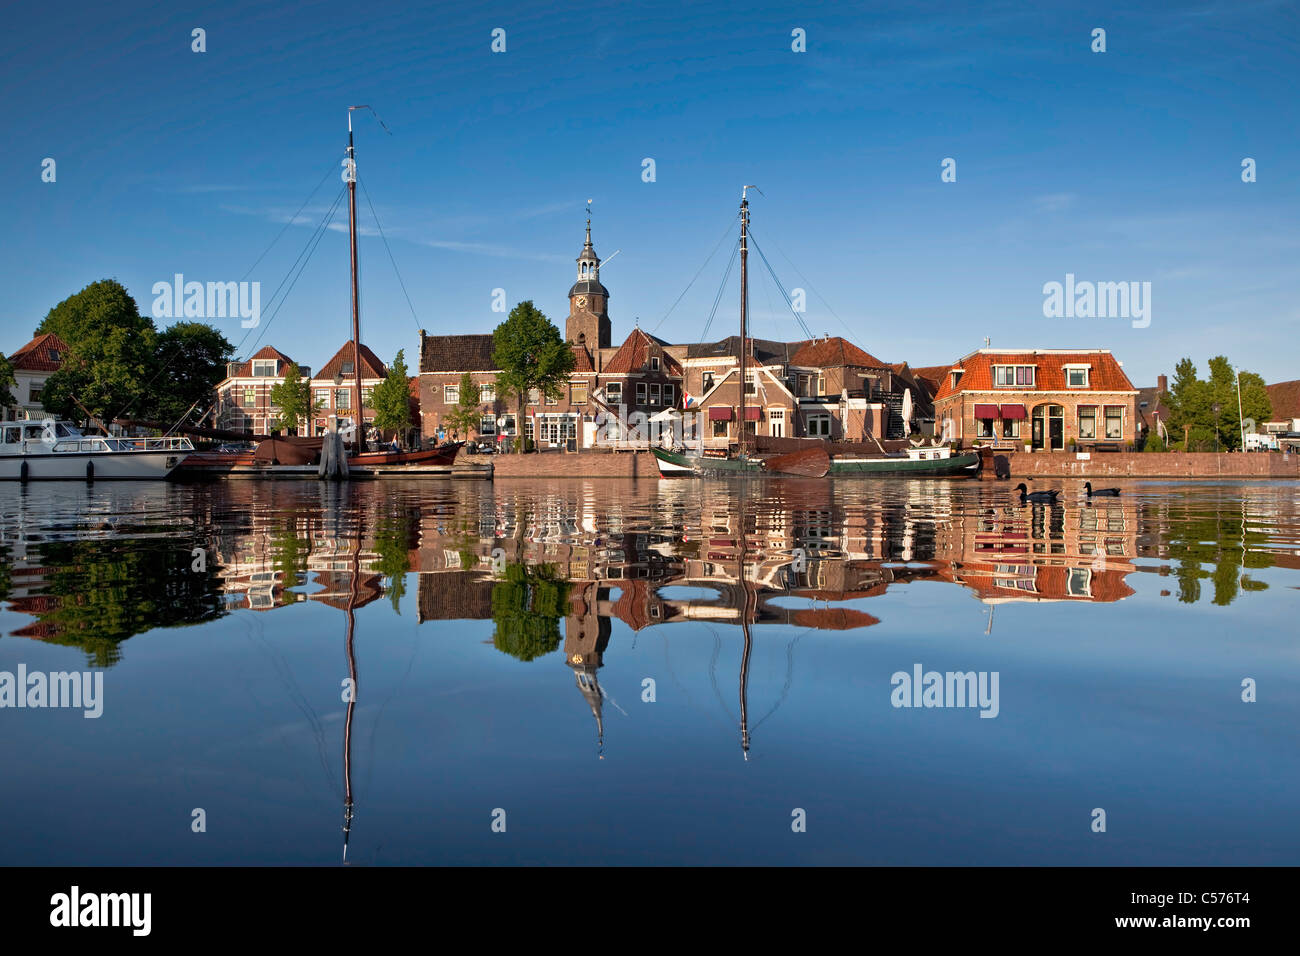 The Netherlands, Blokzijl, Harbour. Skyline. Houses from 17th century. Stock Photo